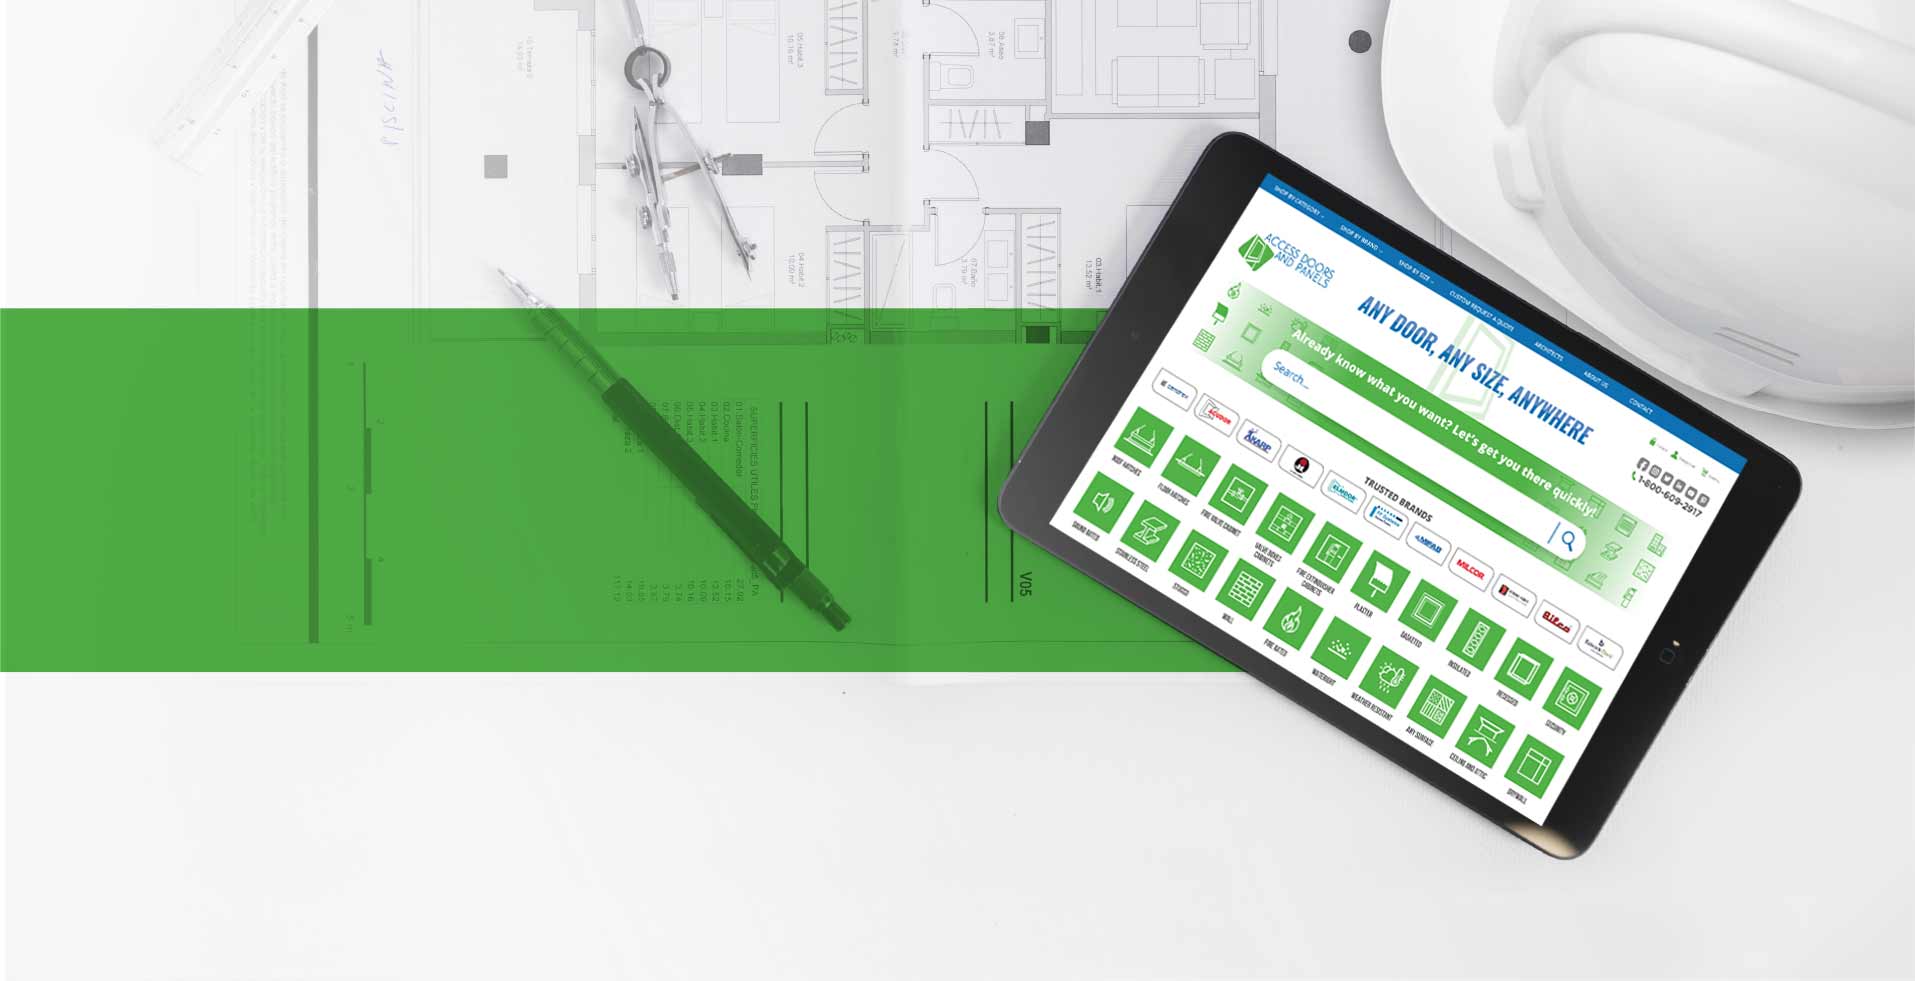 Contractor plan in backgrounds, a tablet, and a text that when you work with access doors and panels you're in good hands.